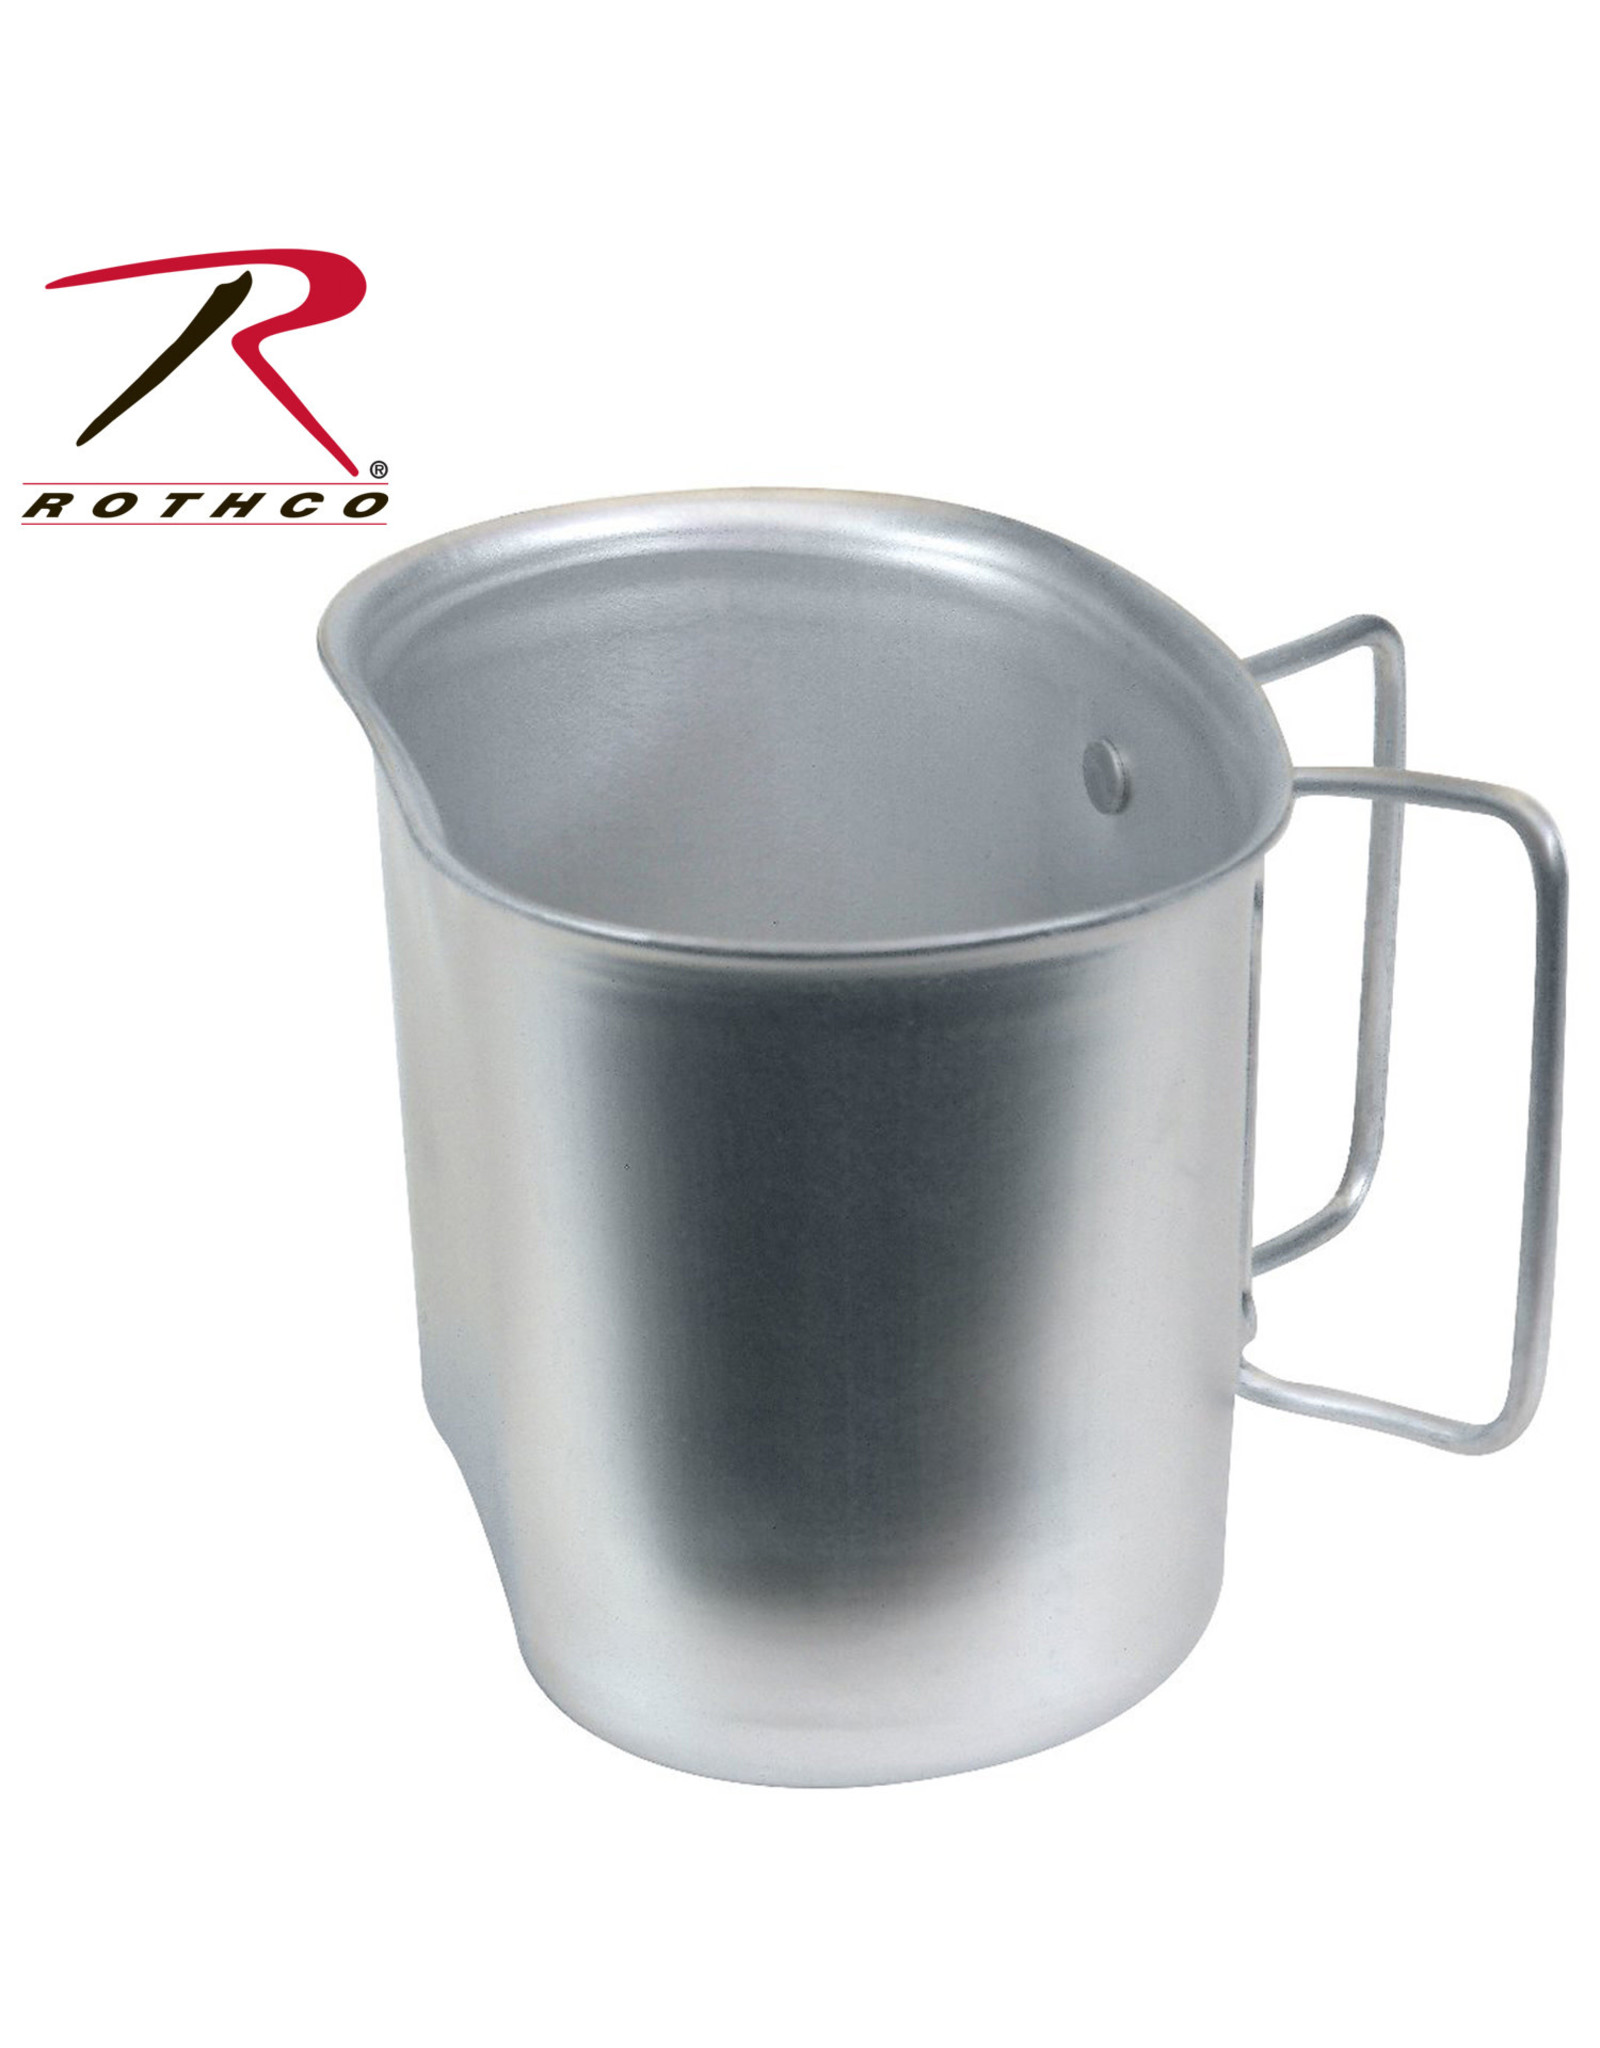 Rothco Aluminum Canteen Cup - NOT GI